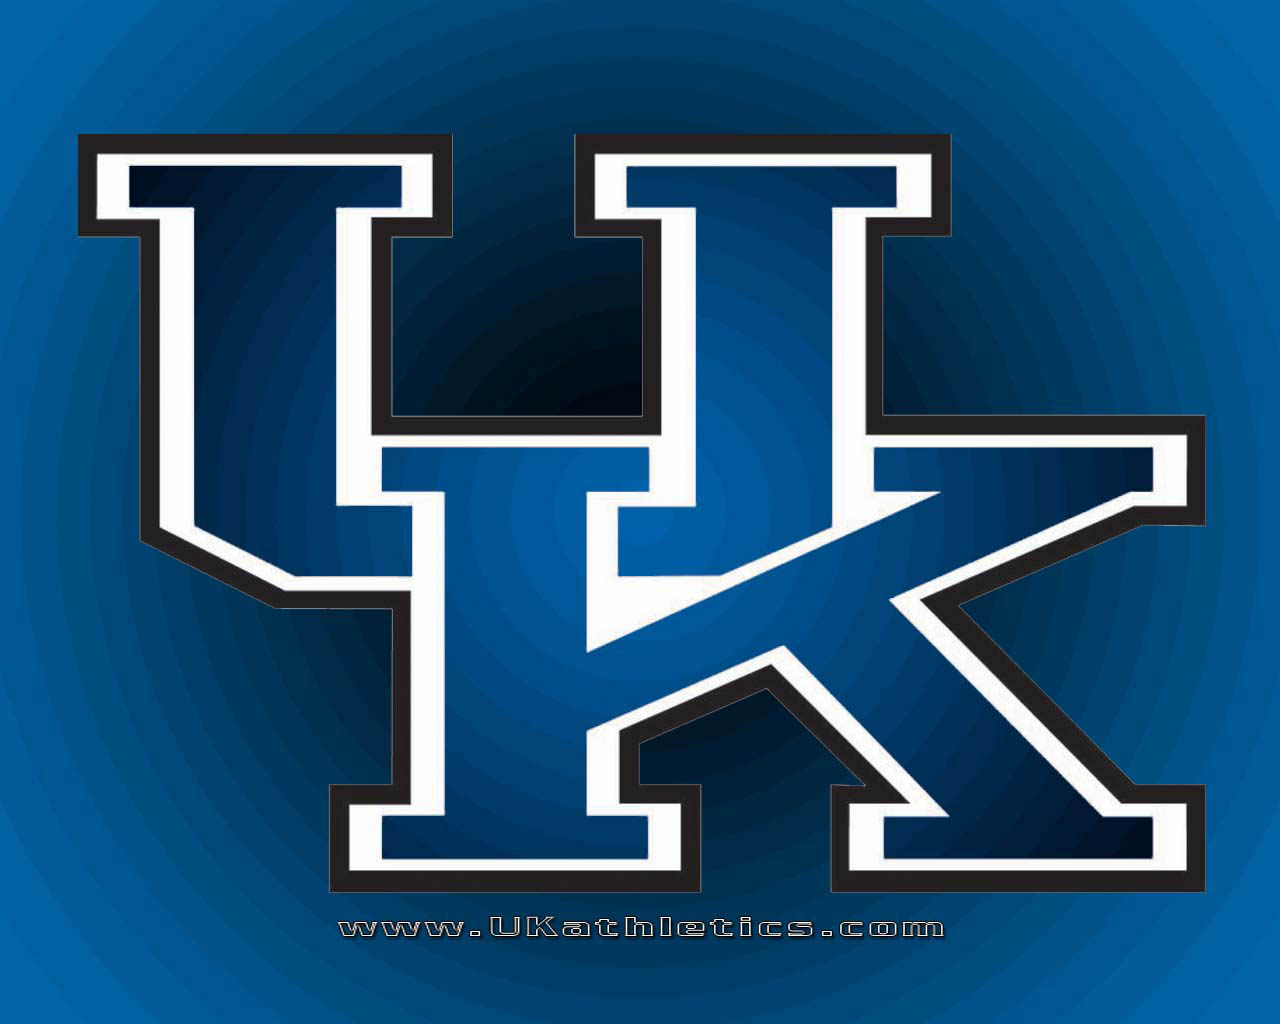 University of Kentucky Page Not Found